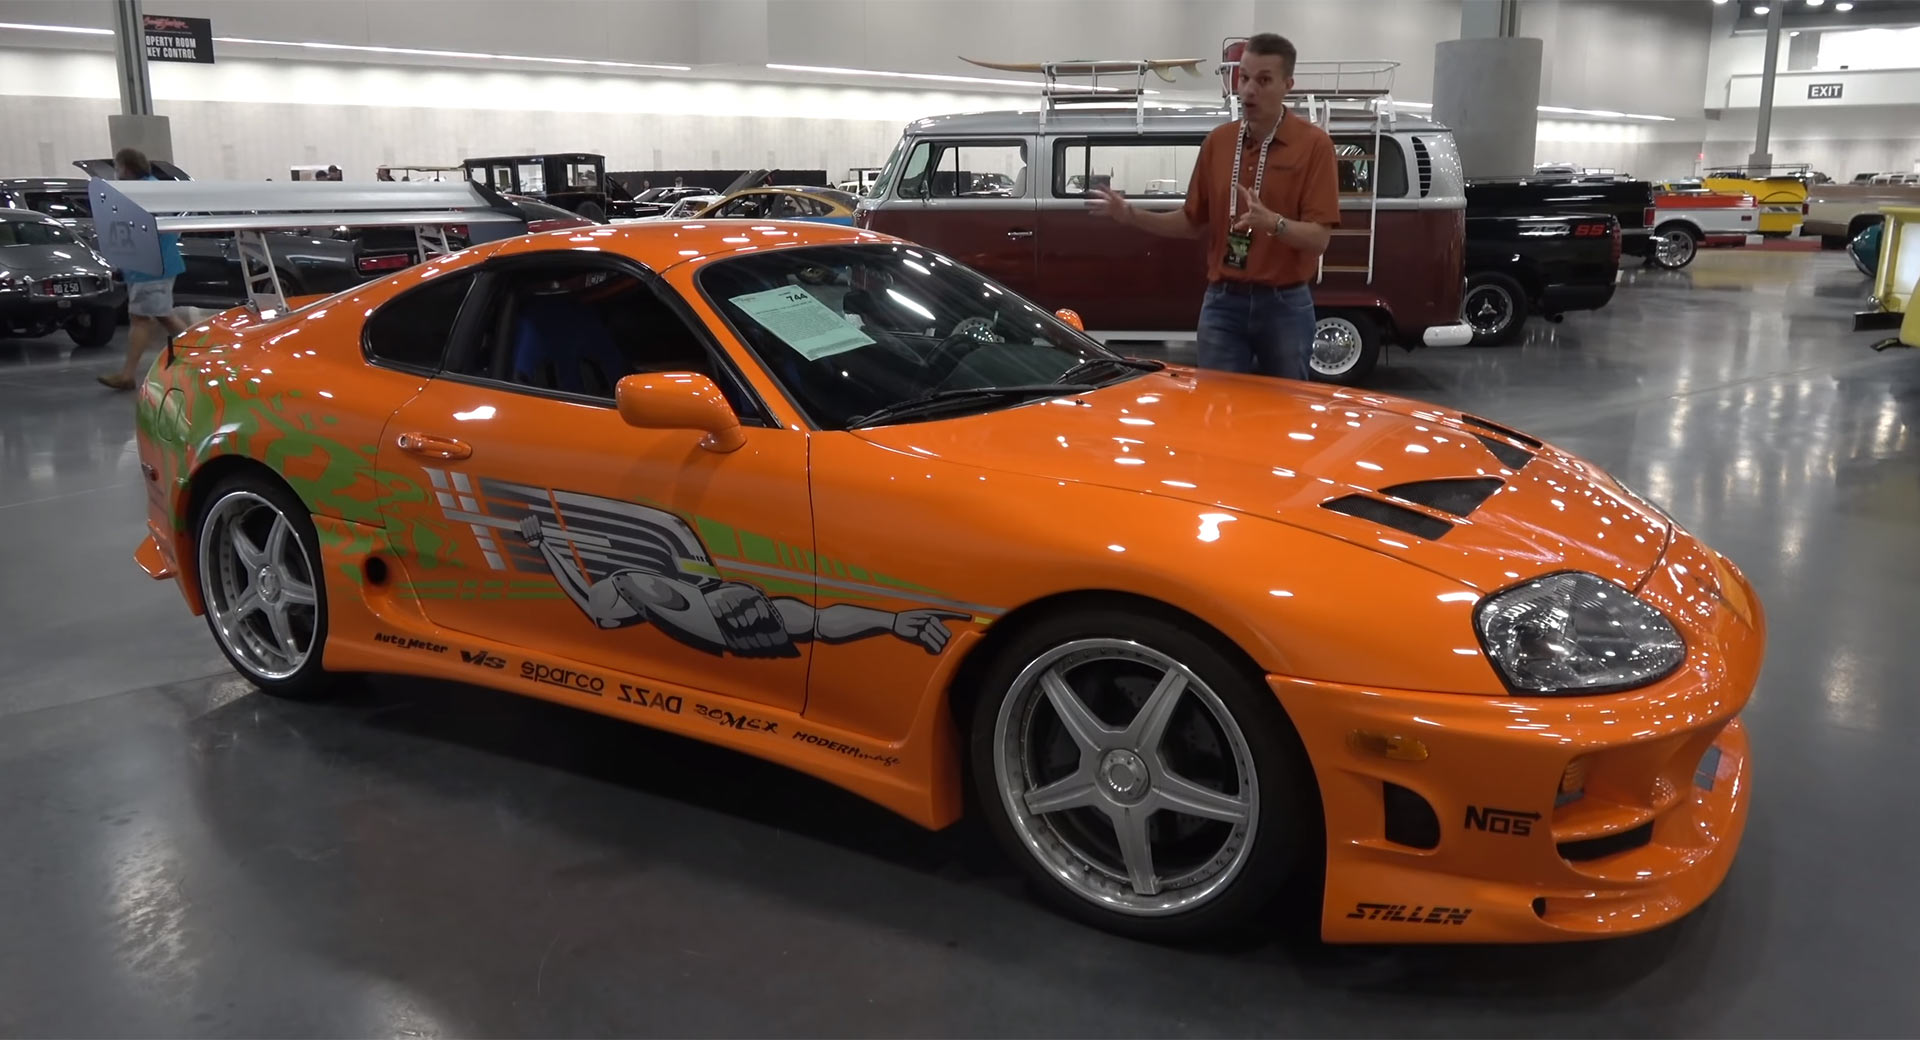 Take A Tour Of The Fast And Furious 1994 Toyota Supra That Just Sold ...